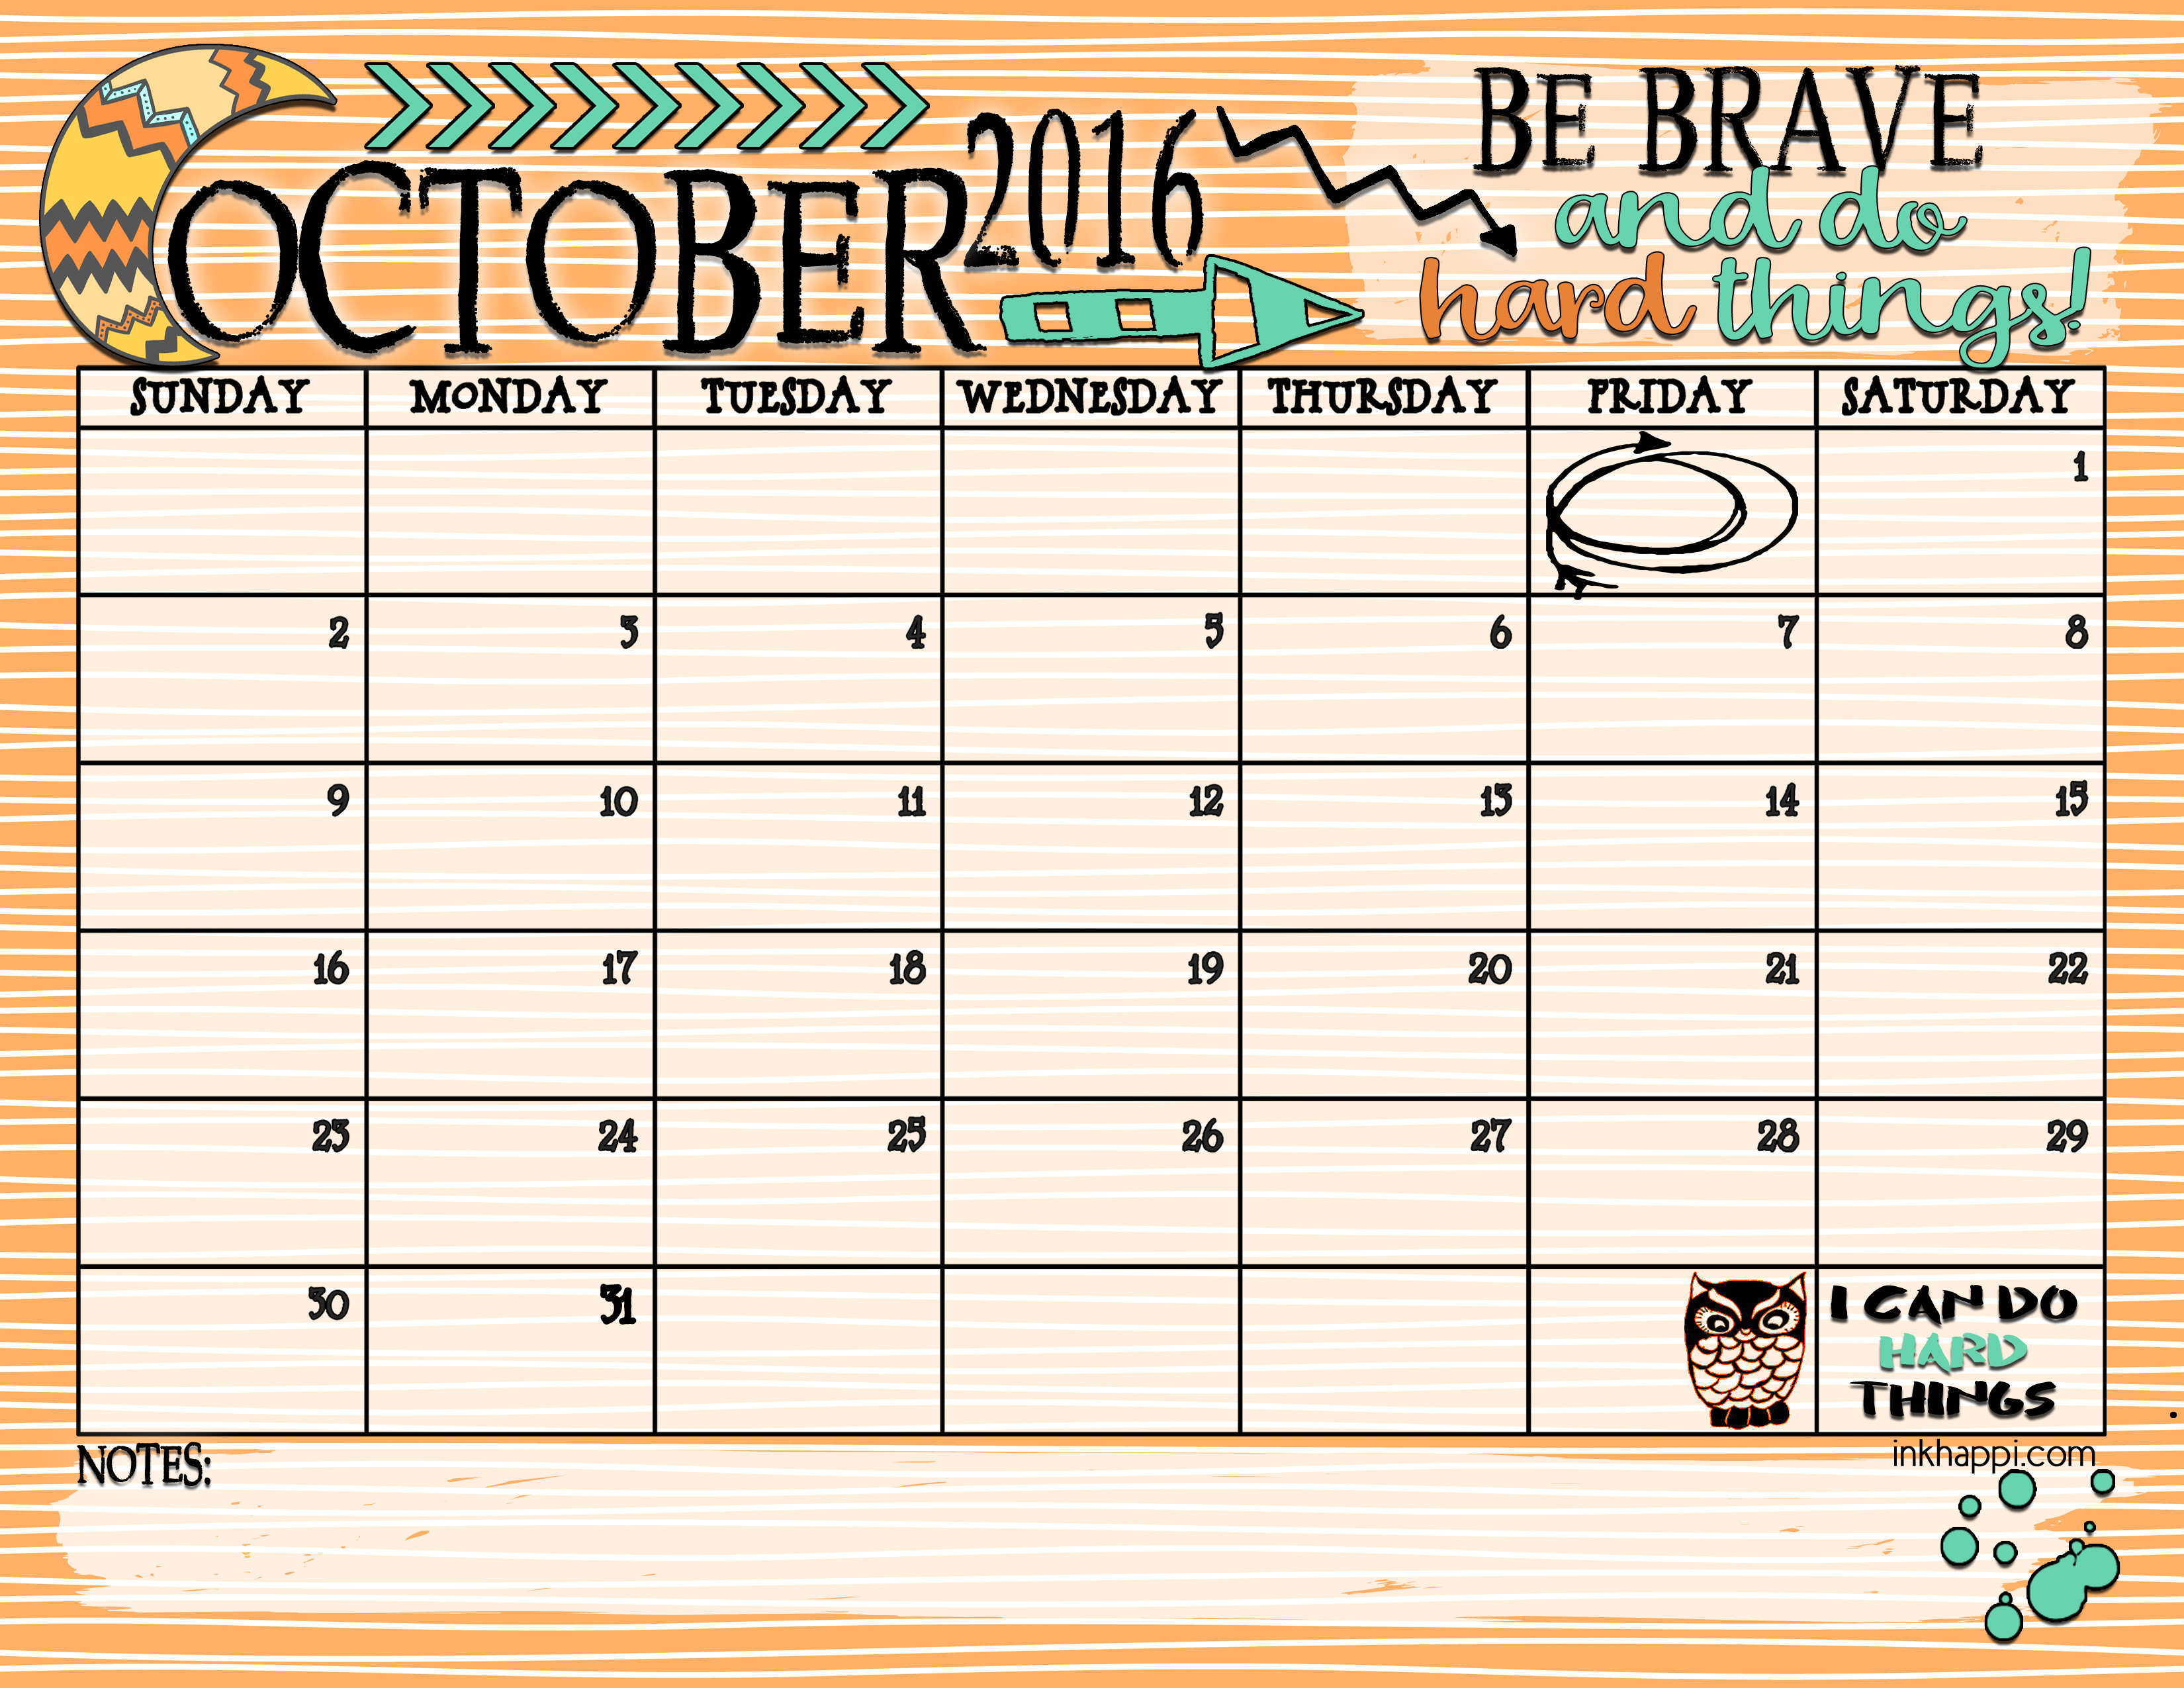 October 2016 Calendar... Be Brave and do Hard Things! inkhappi